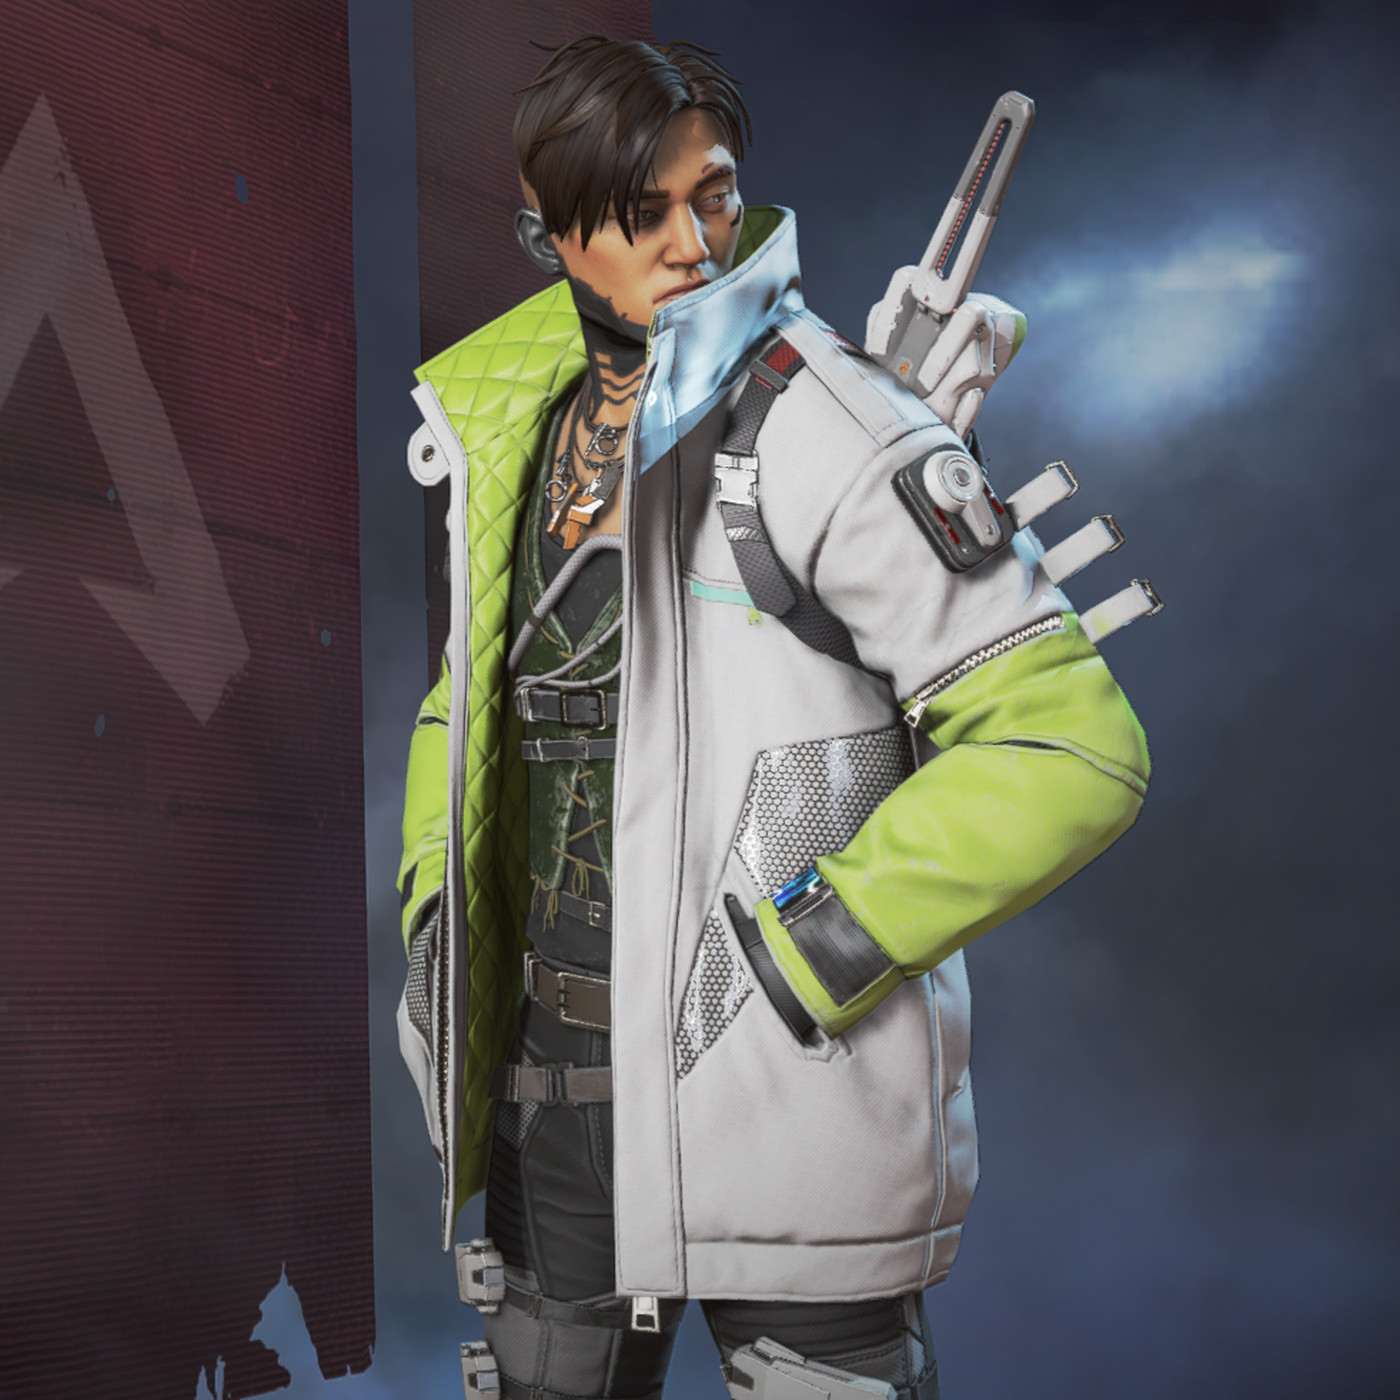 Apex Legends Crypto guide: Patch in to our tips and tricks | cryptolove.fun